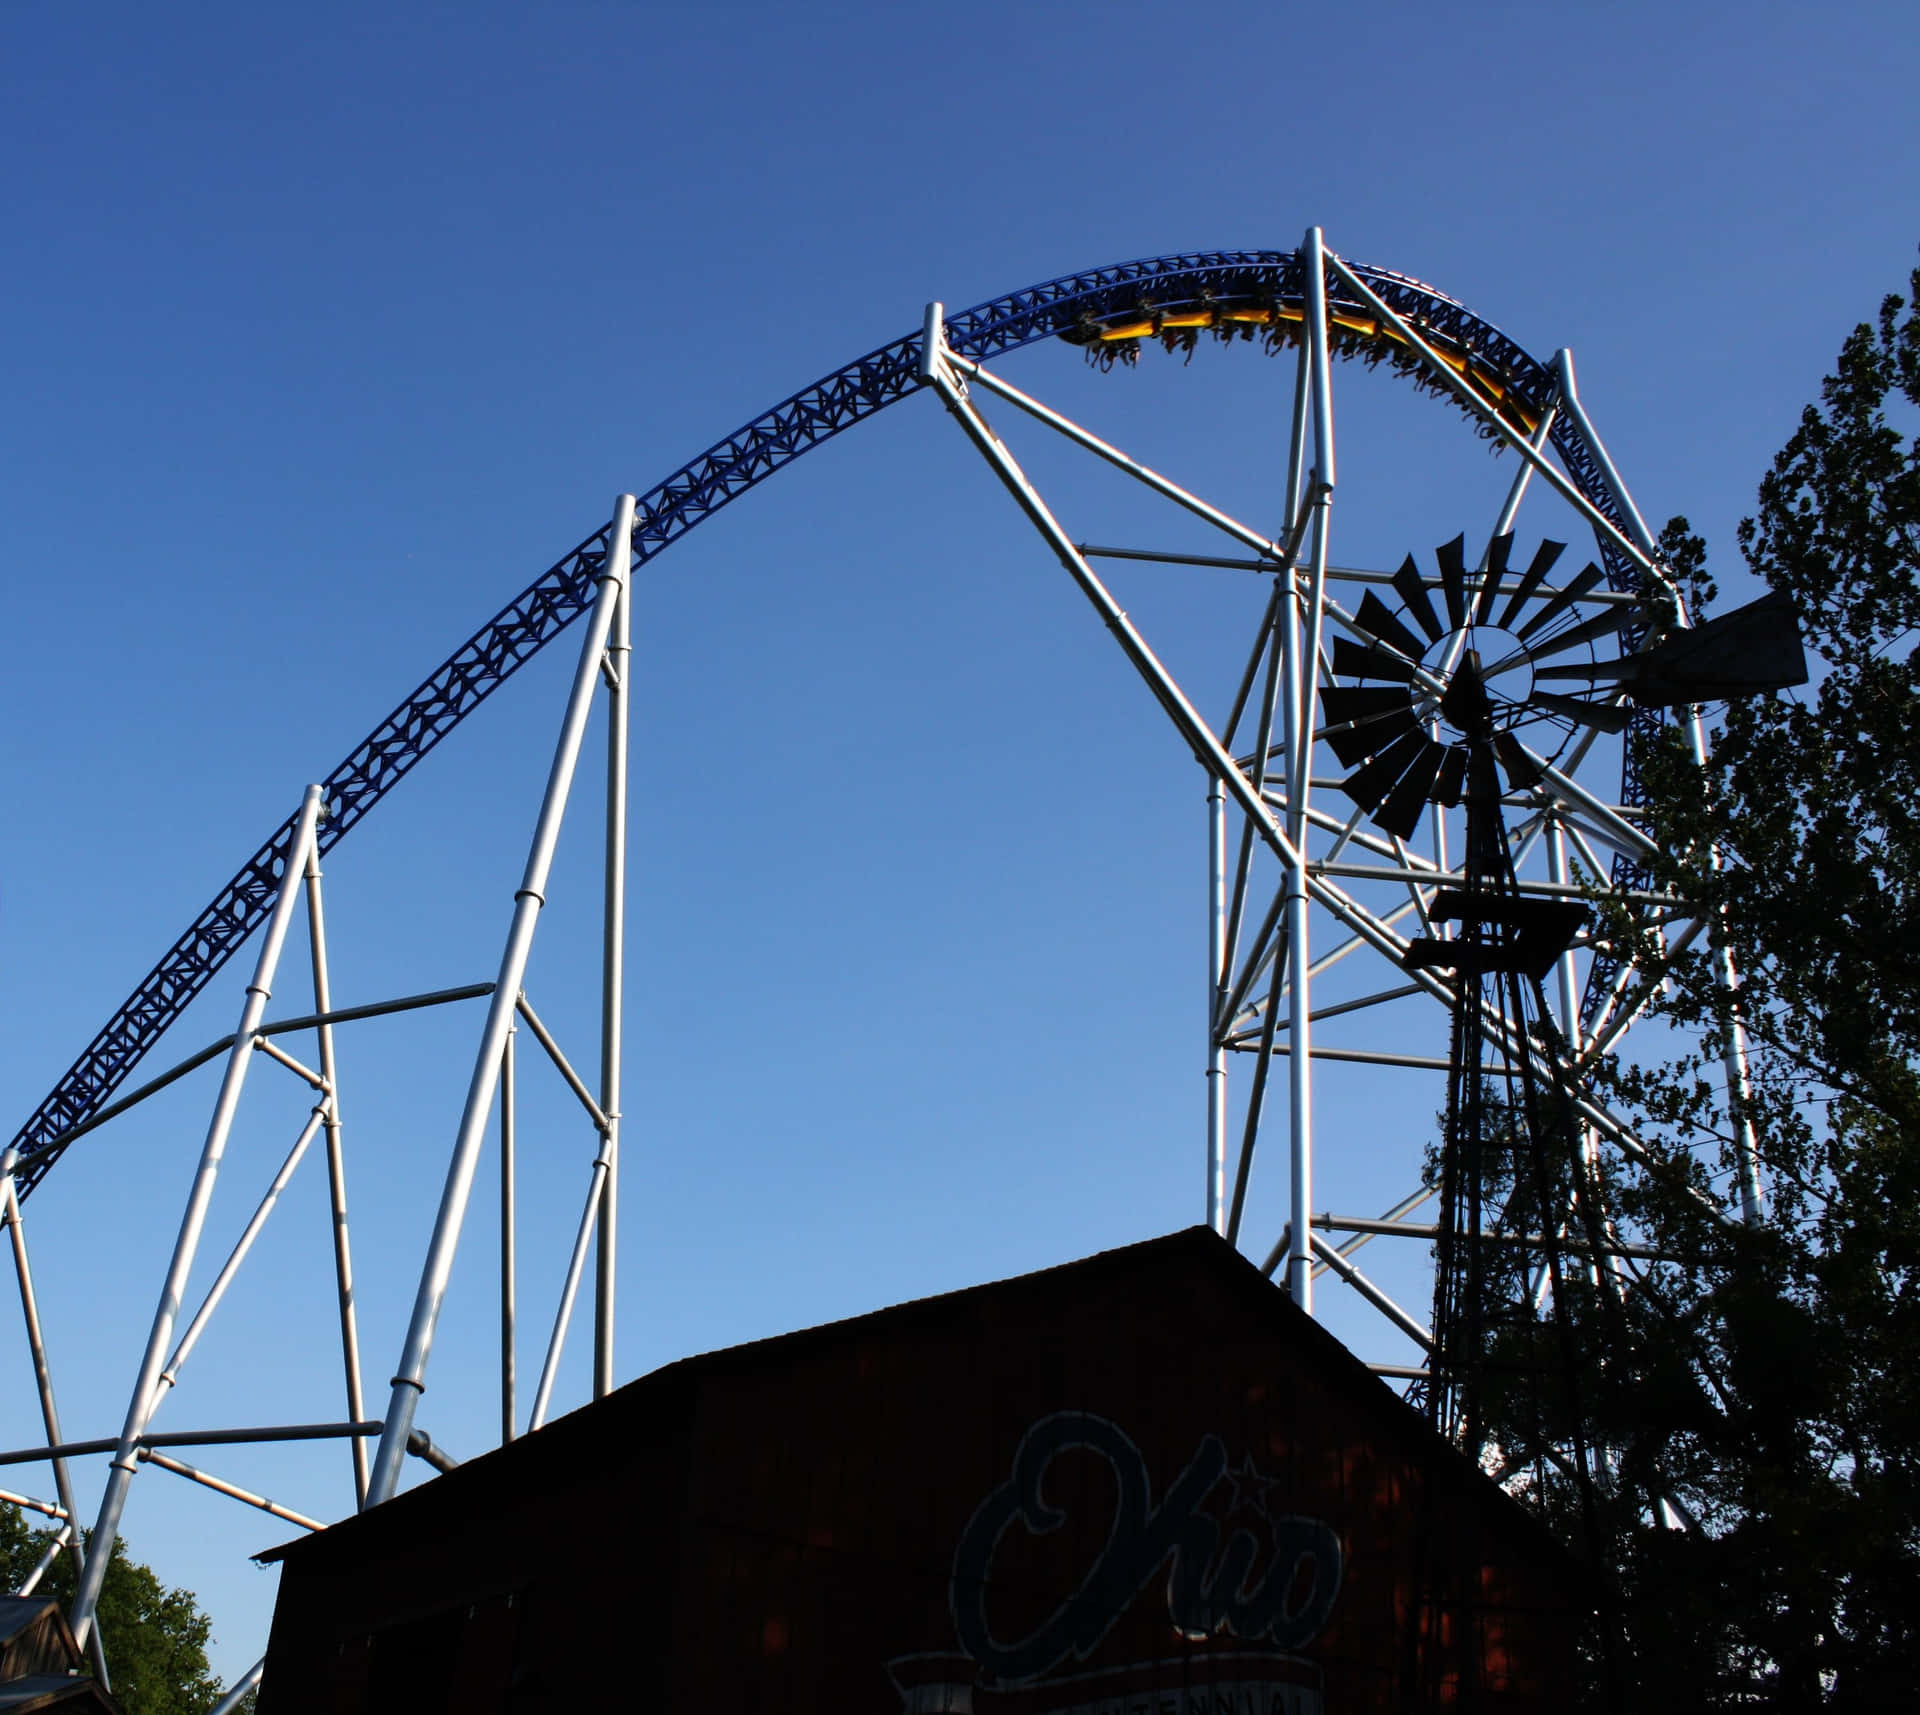 Take a heart-pounding ride on a thrilling roller coaster